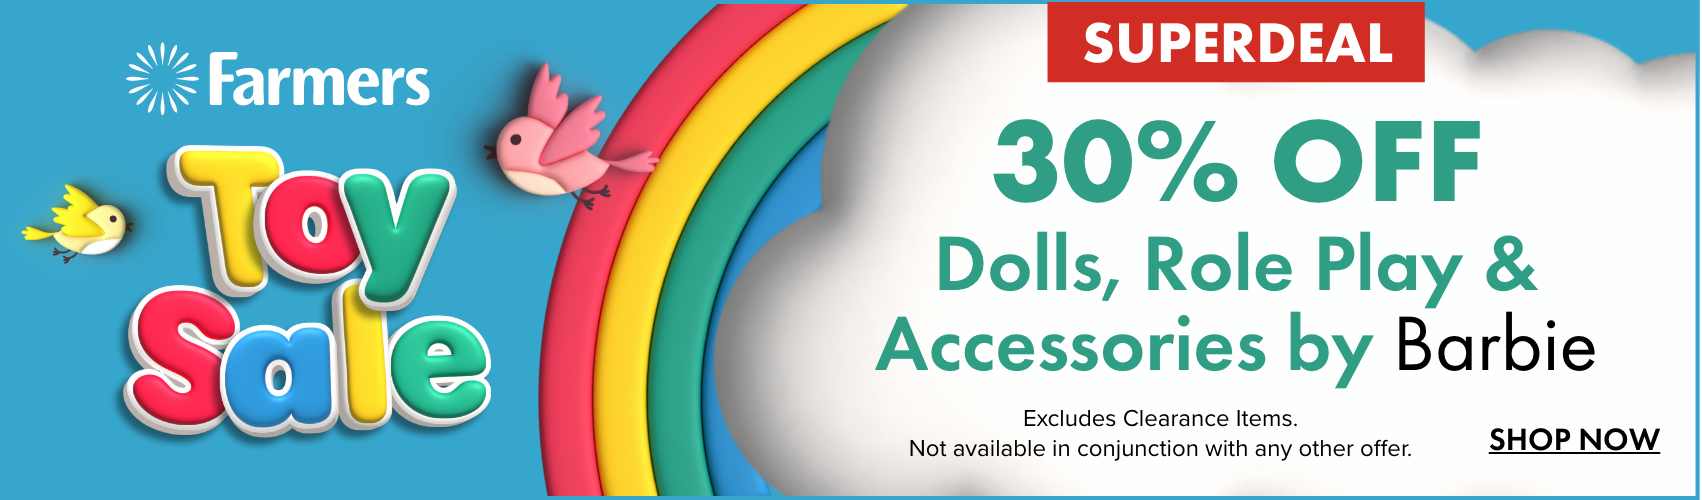 30% OFF Dolls, Role Play & Accessories by Barbie